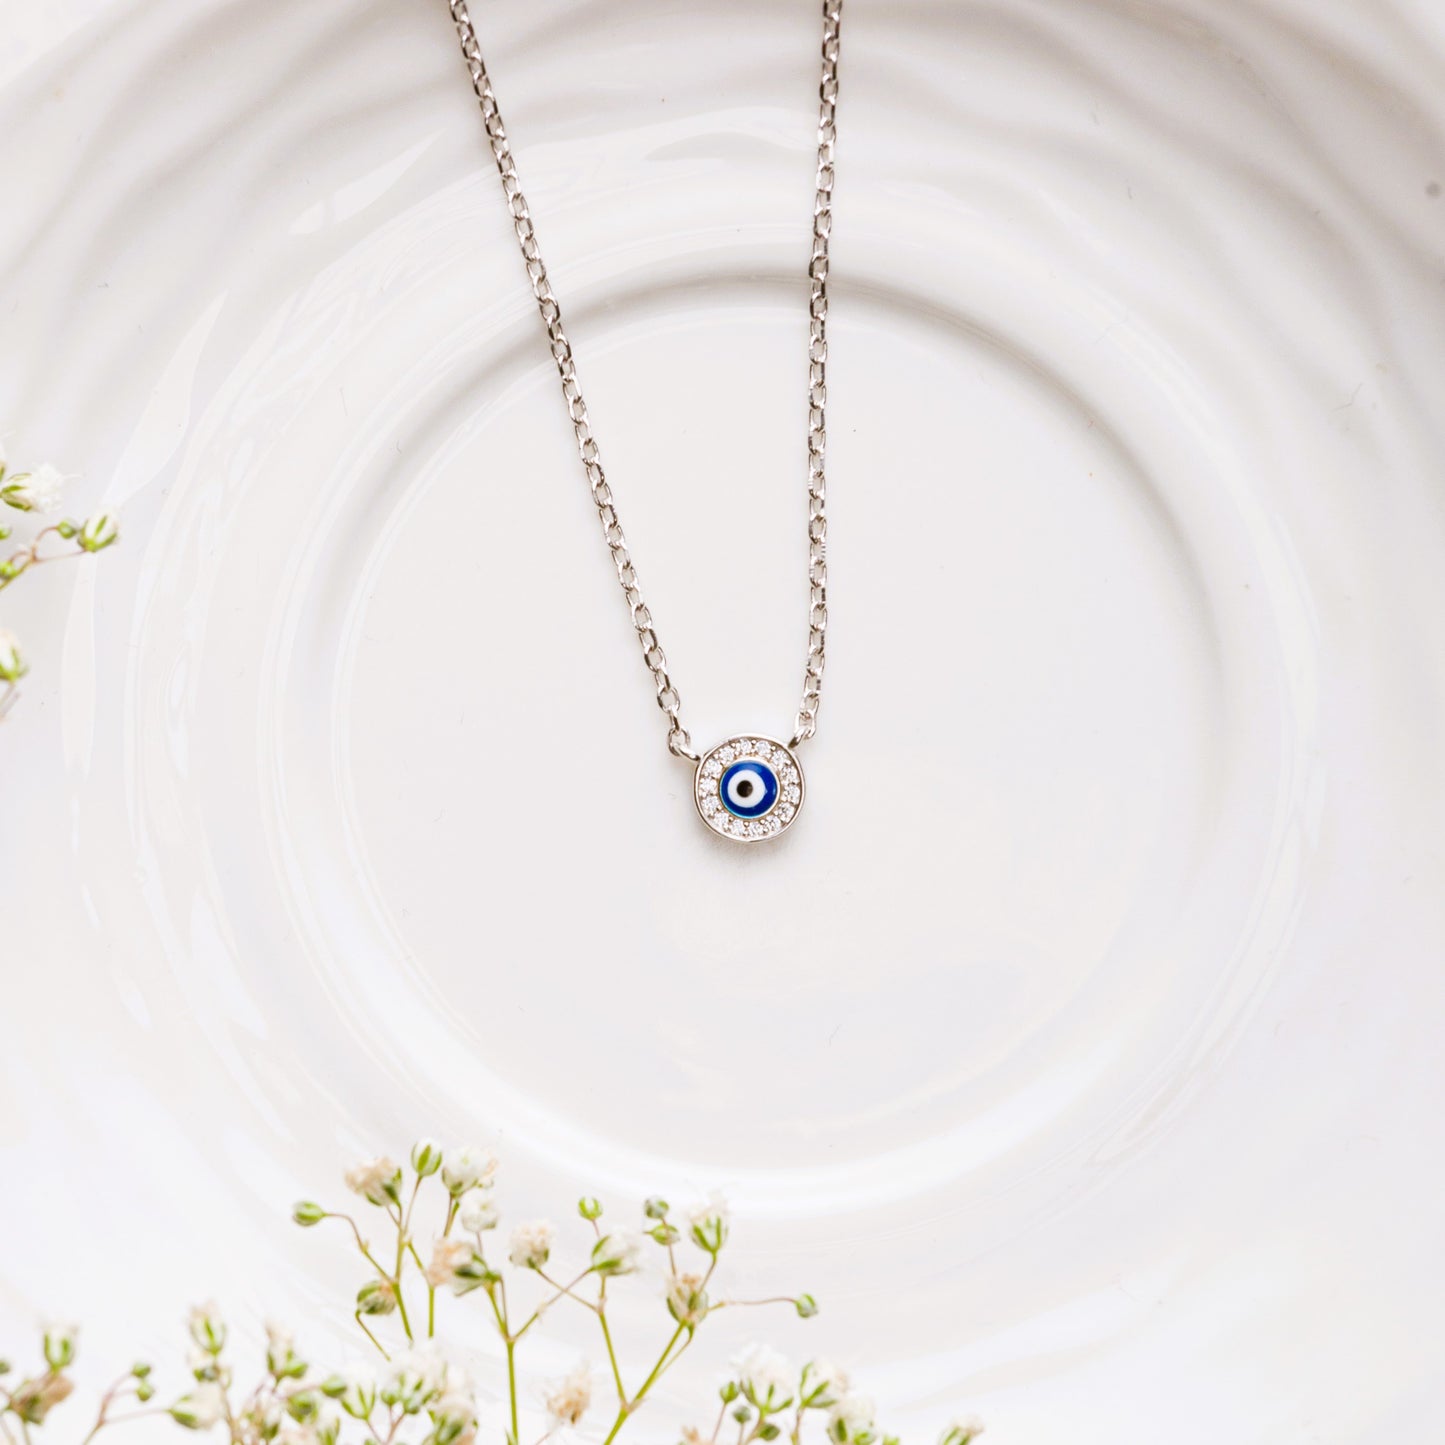 Buy Dark Blue and White Enamel Evil Eye Pendant Chain Necklace. 925  Sterling Silver.925 Sterling Silver Necklace.good Luck & Protection  Jewelry. Online in India - Etsy